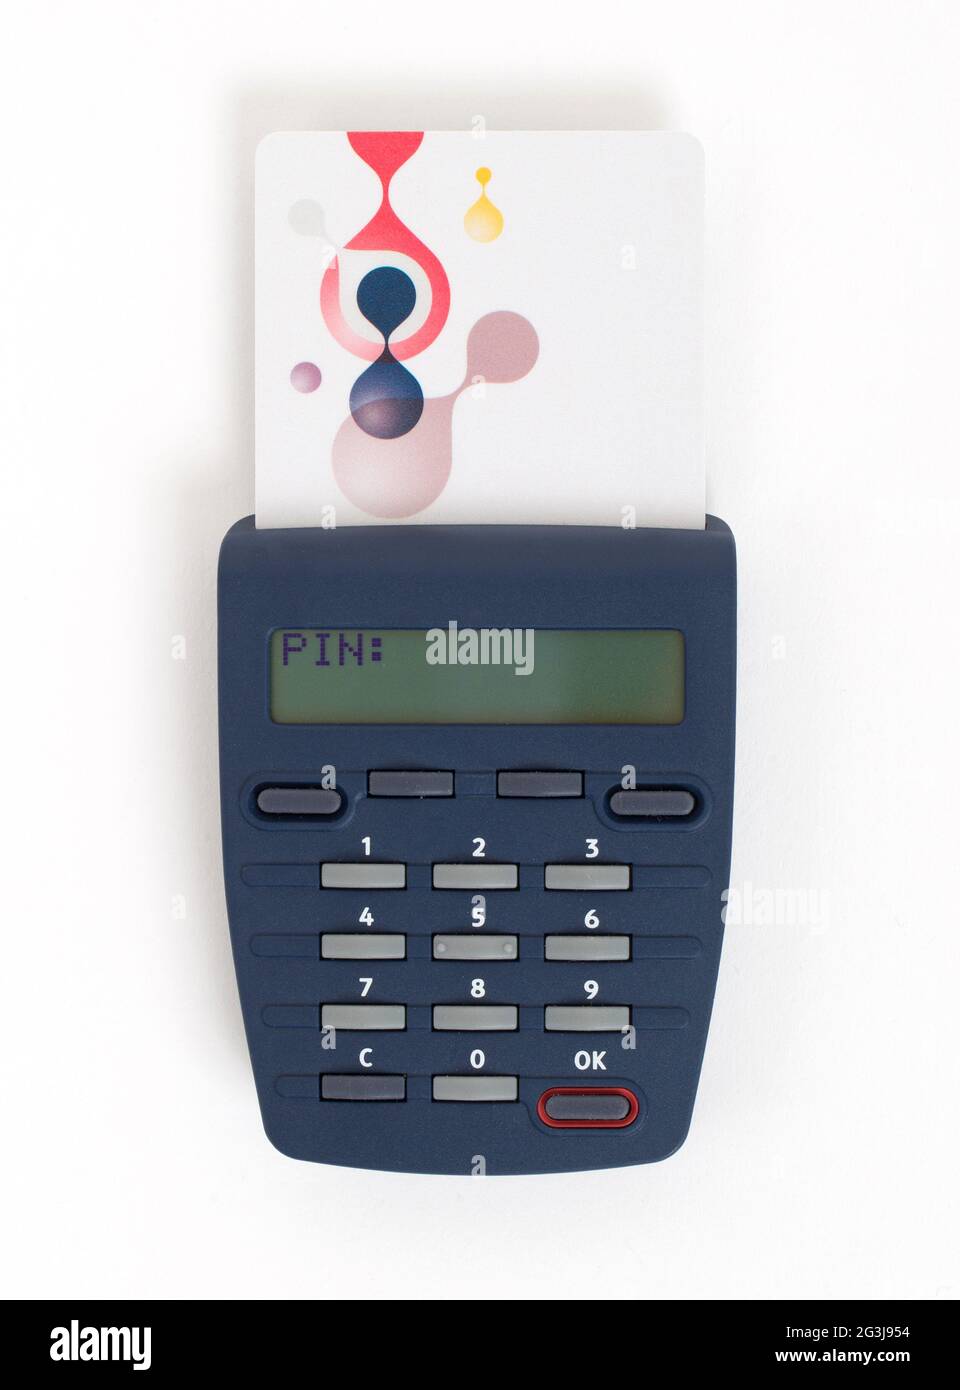 Security device for banking at home Stock Photo